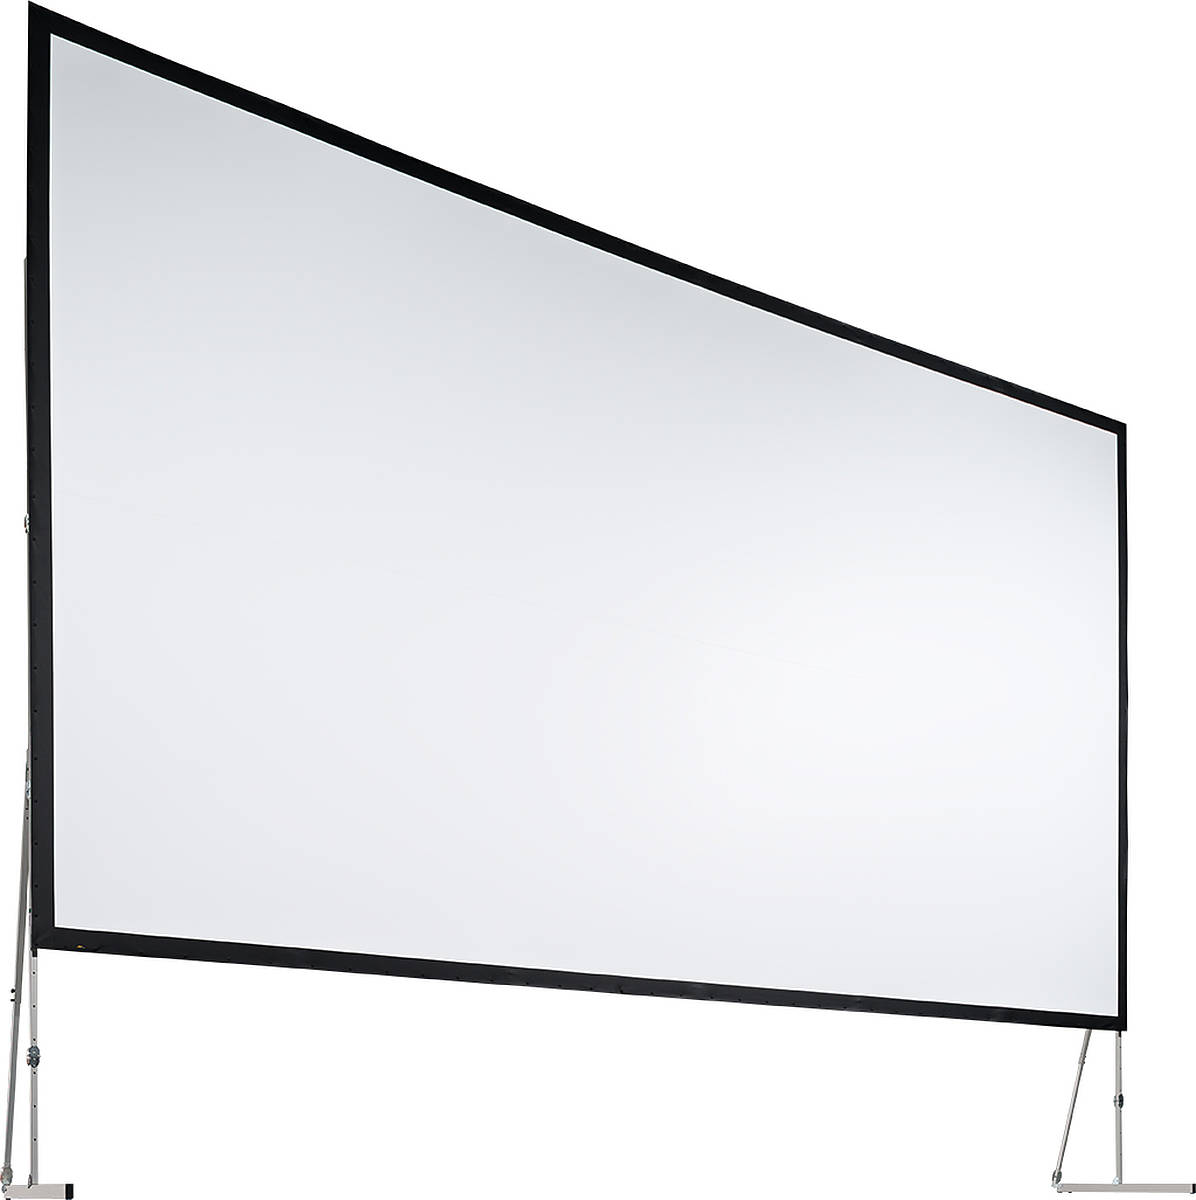 AV Stumpfl BMV-AW447/R10 198" (5.04m)
 16:10 aspect ratio projection screen product image. Click to enlarge.